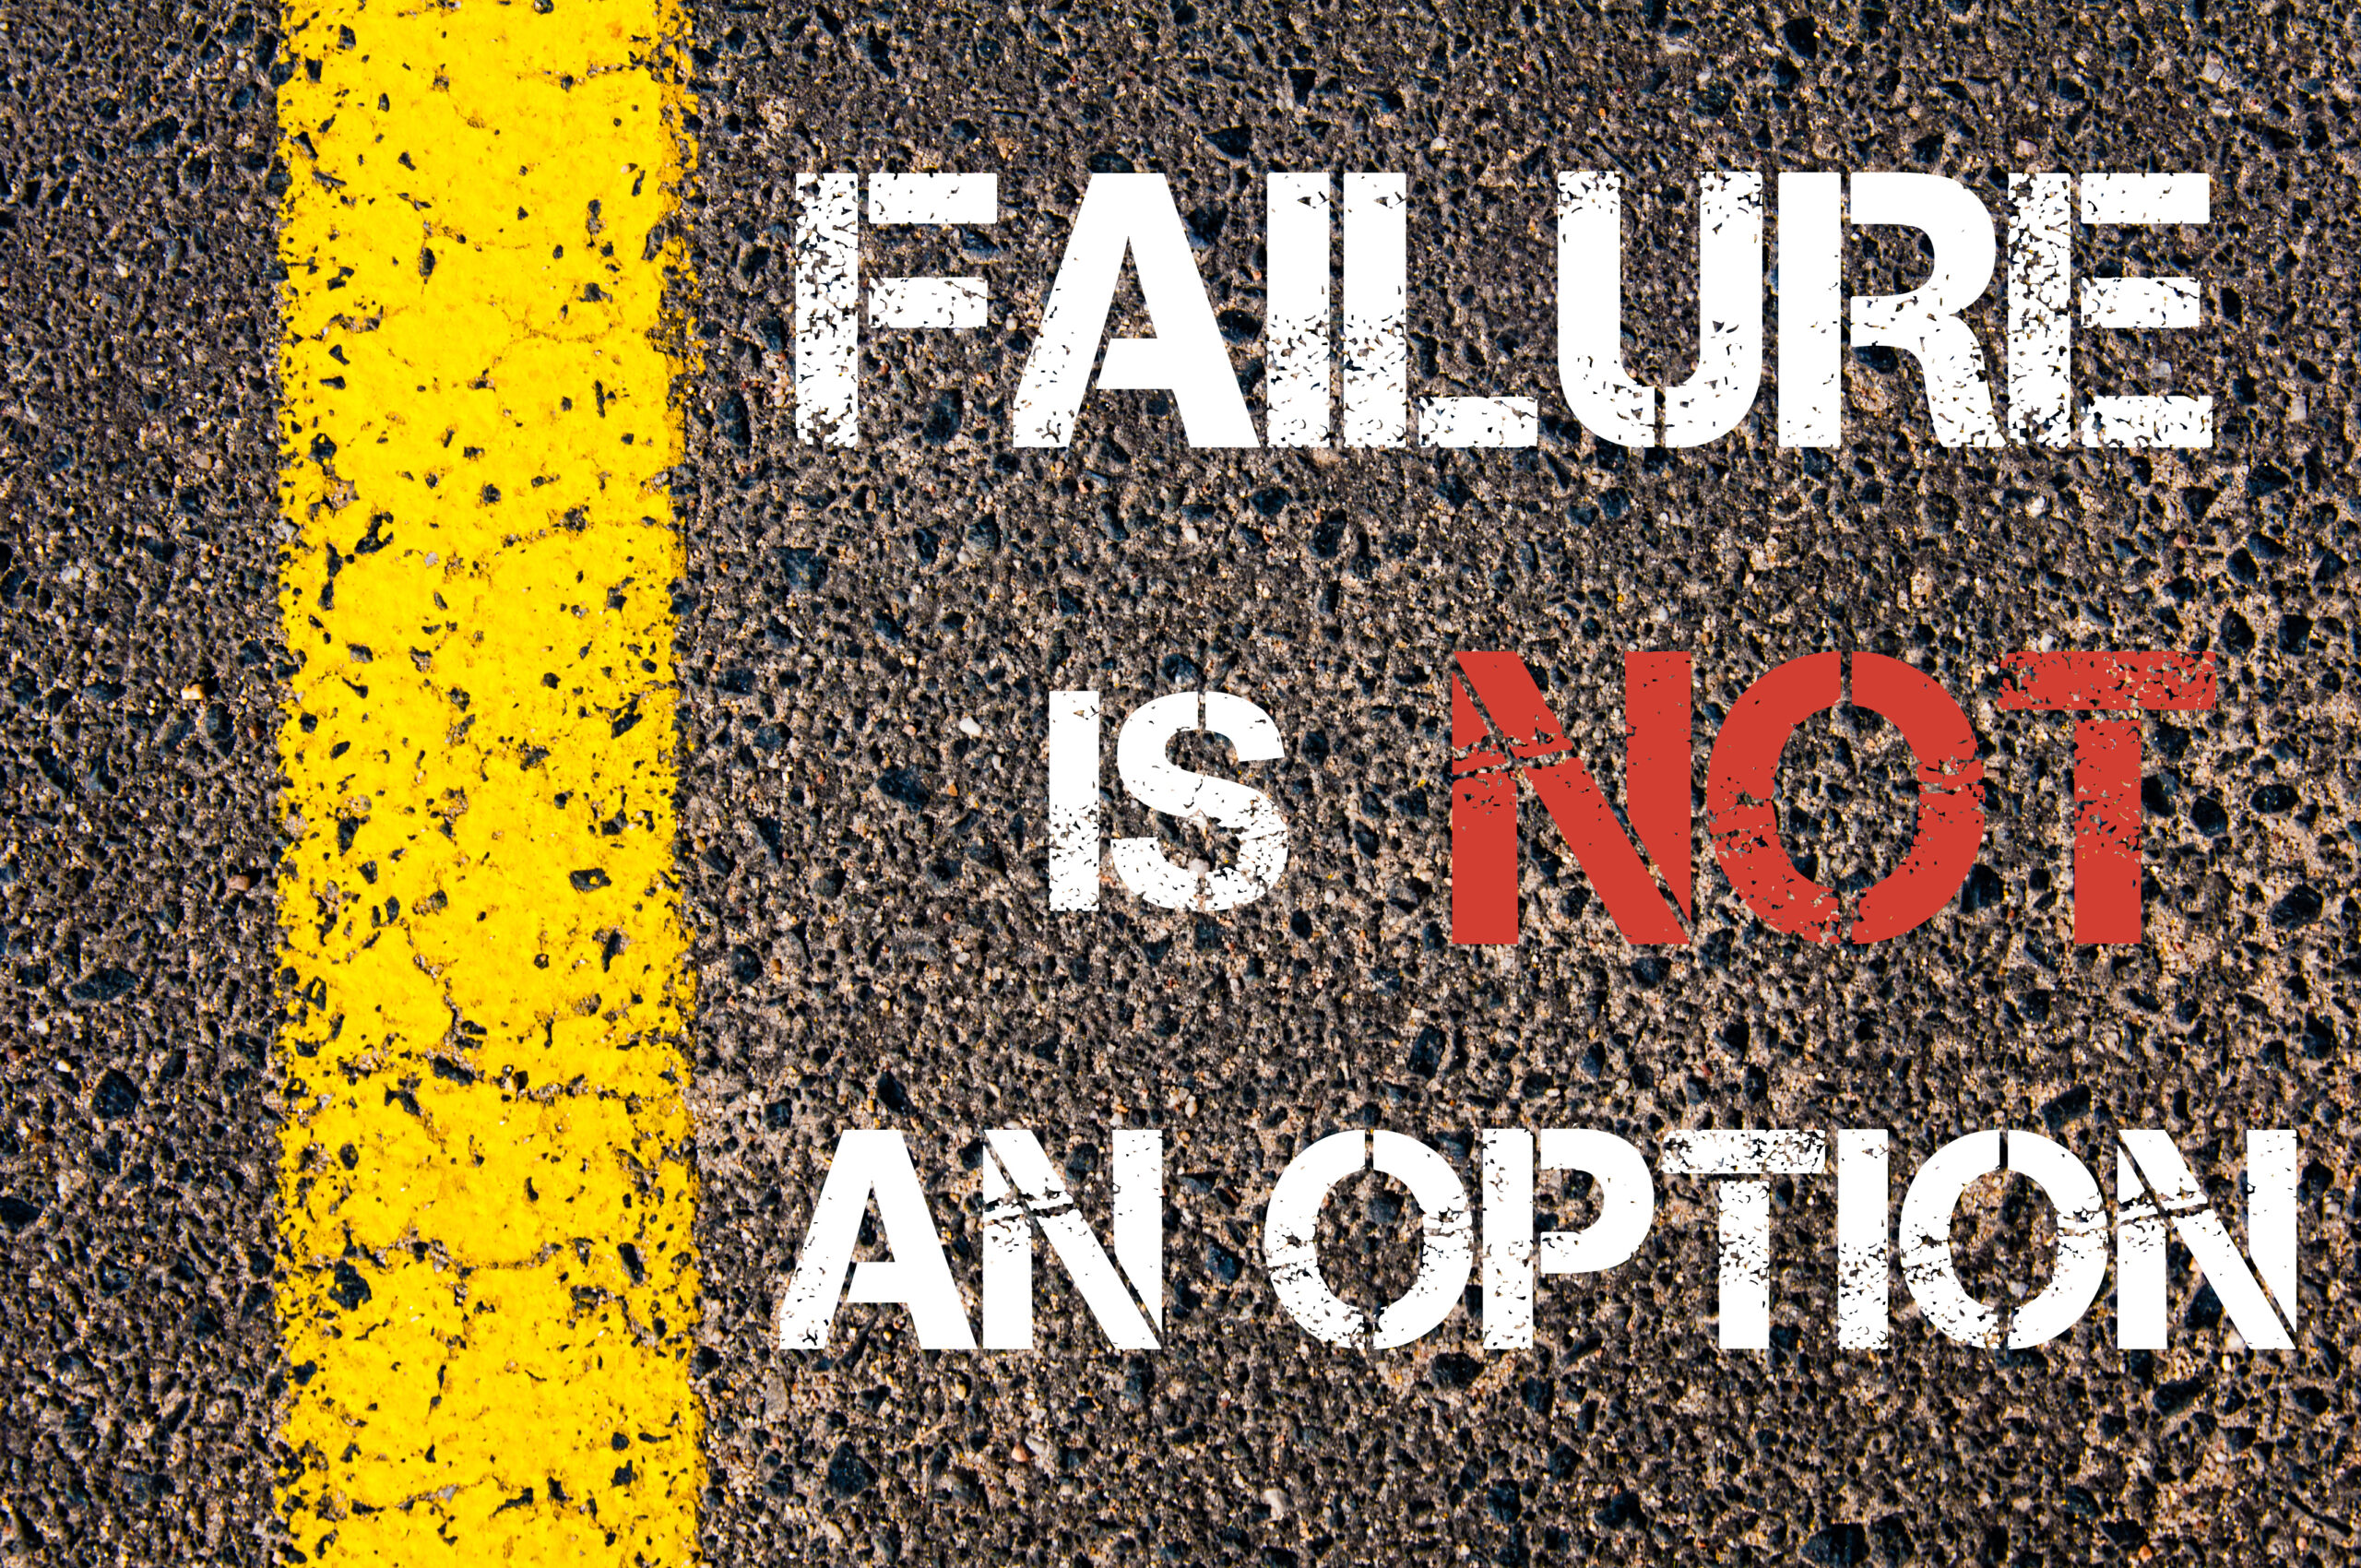 "Failure is not an option" is written in chalk on the street beside a yellow lane line. If you're a failing entrepreneur, that doesn't mean you'll never succeed.